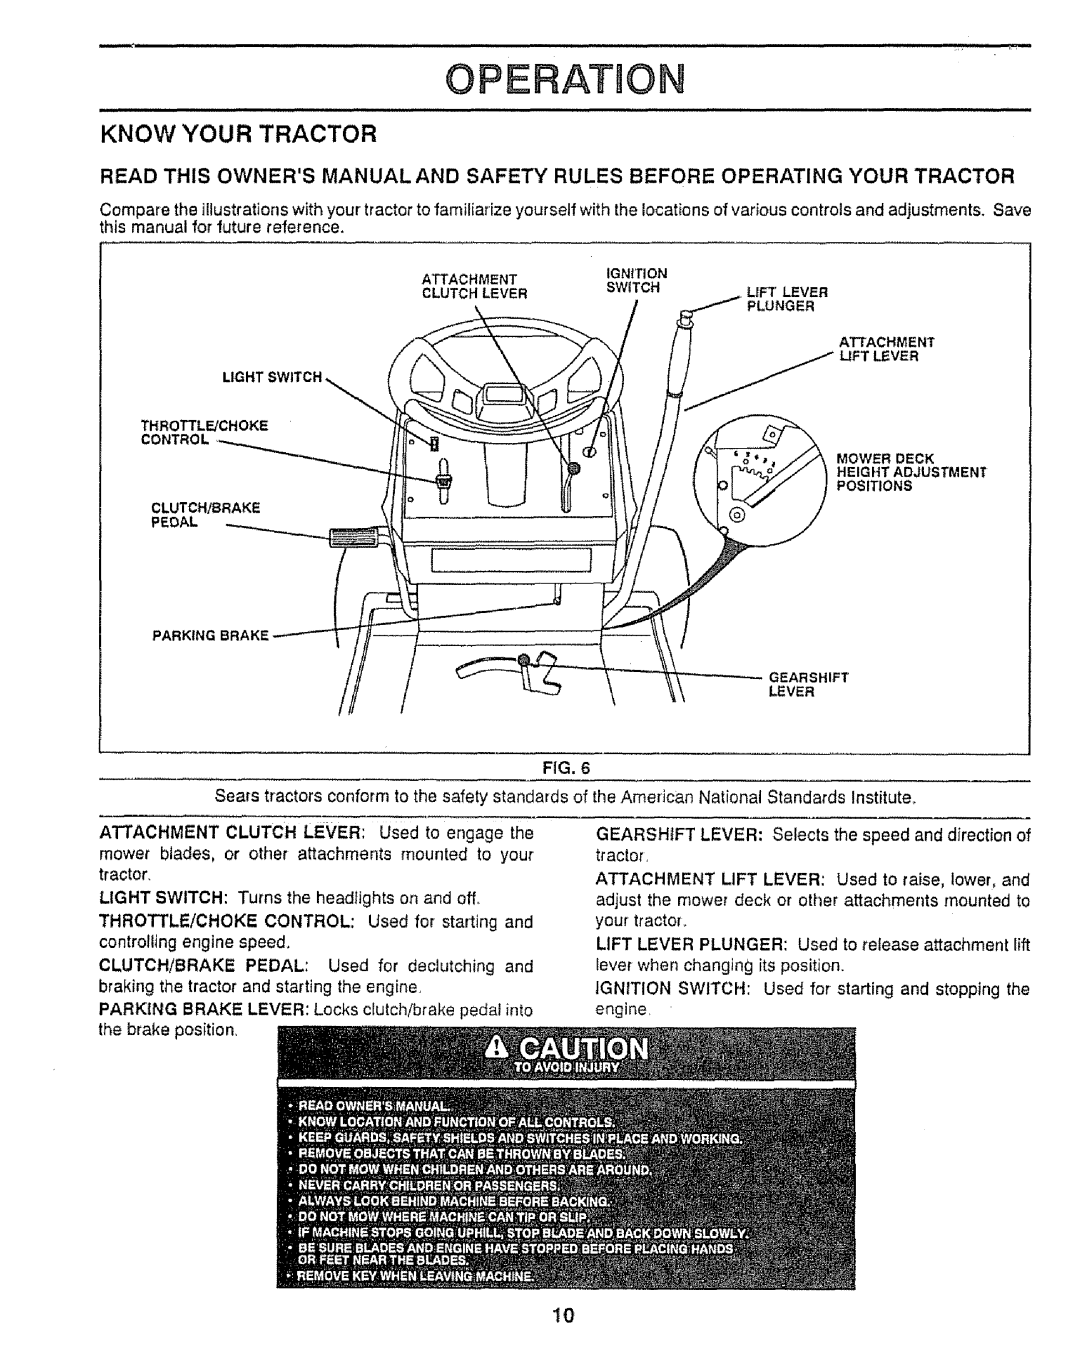 Craftsman 917.25552 manual Know Your Tractor, Switch 